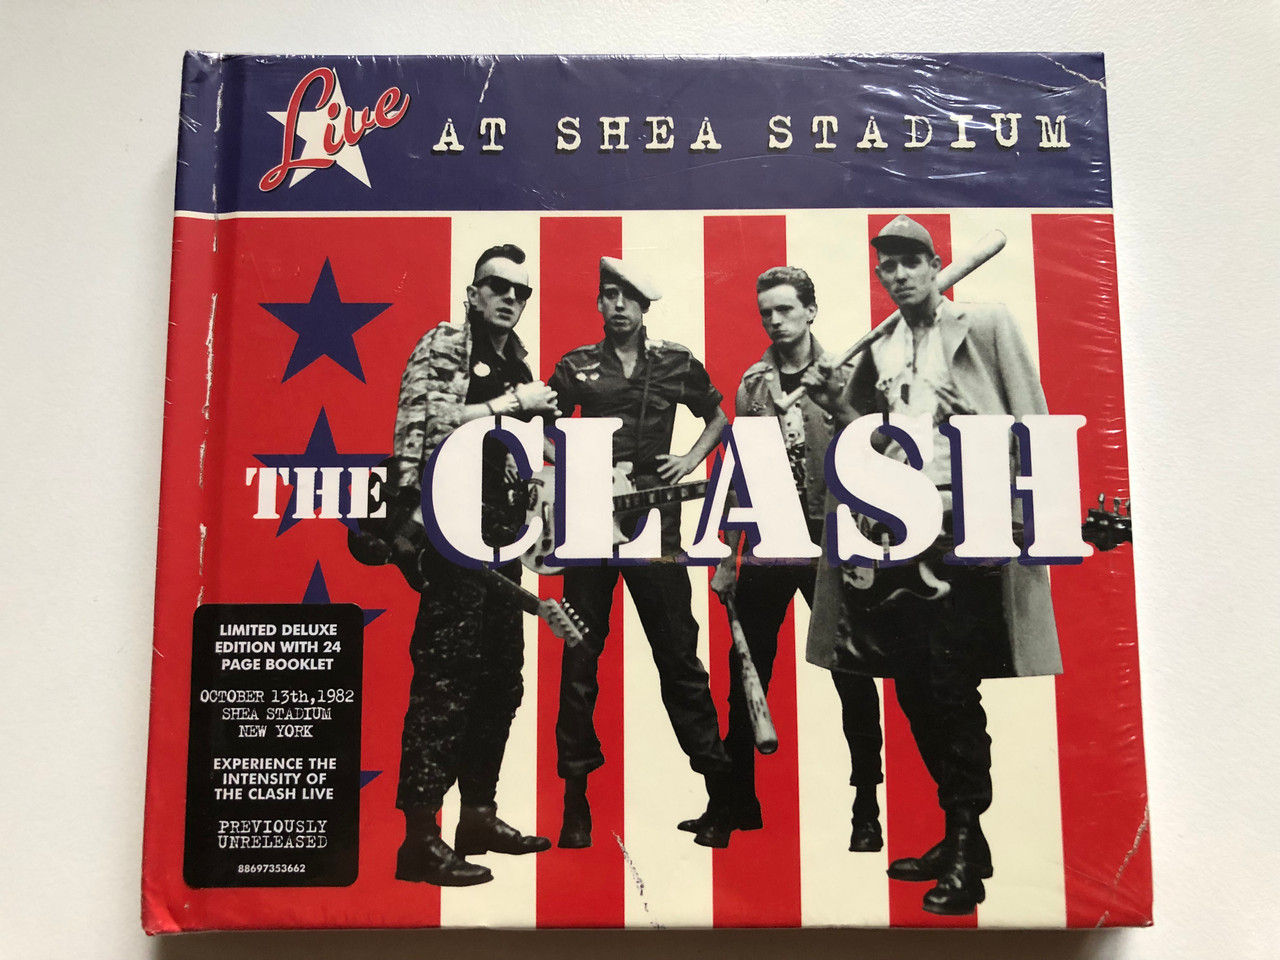 https://cdn10.bigcommerce.com/s-62bdpkt7pb/products/0/images/249239/The_Clash_Live_At_Shea_Stadium_Limited_Deluxe_Edition_With_24_Page_Booklet_October_13th_1982_Shea_Stadion_New_York_Experience_The_Intensity_Of_The_Clash_Live_Sony_BMG_Music_Entertain_1__42460.1660840846.1280.1280.JPG?c=2&_gl=1*1cxifqd*_ga*MjA2NTIxMjE2MC4xNTkwNTEyNTMy*_ga_WS2VZYPC6G*MTY2MDgyNjg1NS41MzEuMS4xNjYwODQwODA2LjYwLjAuMA..